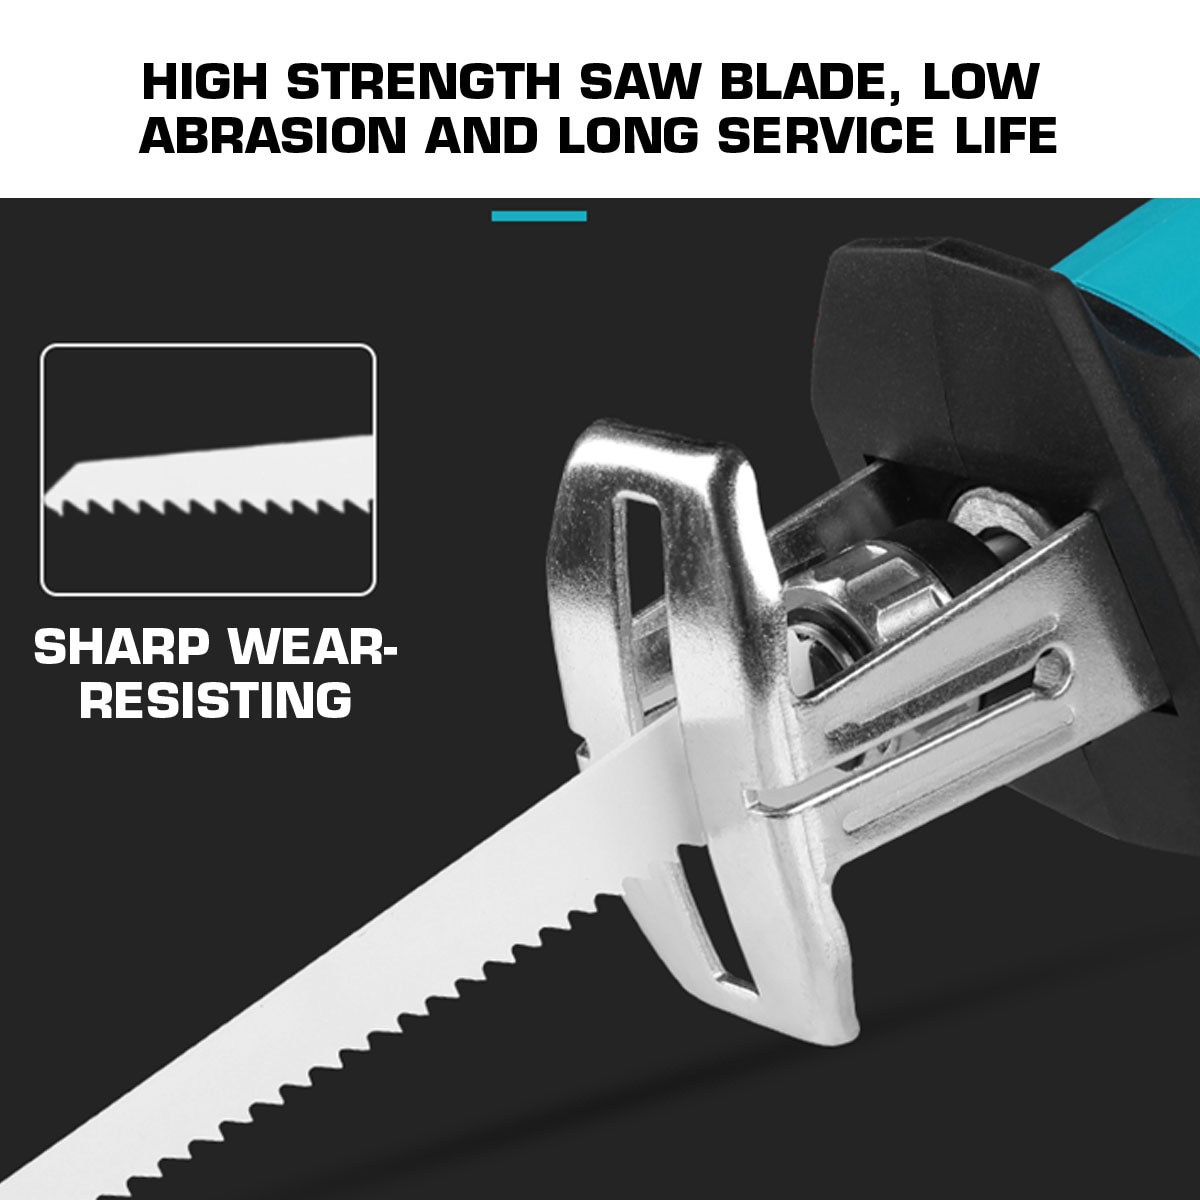 88V Cordless Electric Saw Reciprocating Saw Handsaw Saber Metal Cutting Wood Tool for Metal Wood Pipe Cutting Saw with 4 Blades